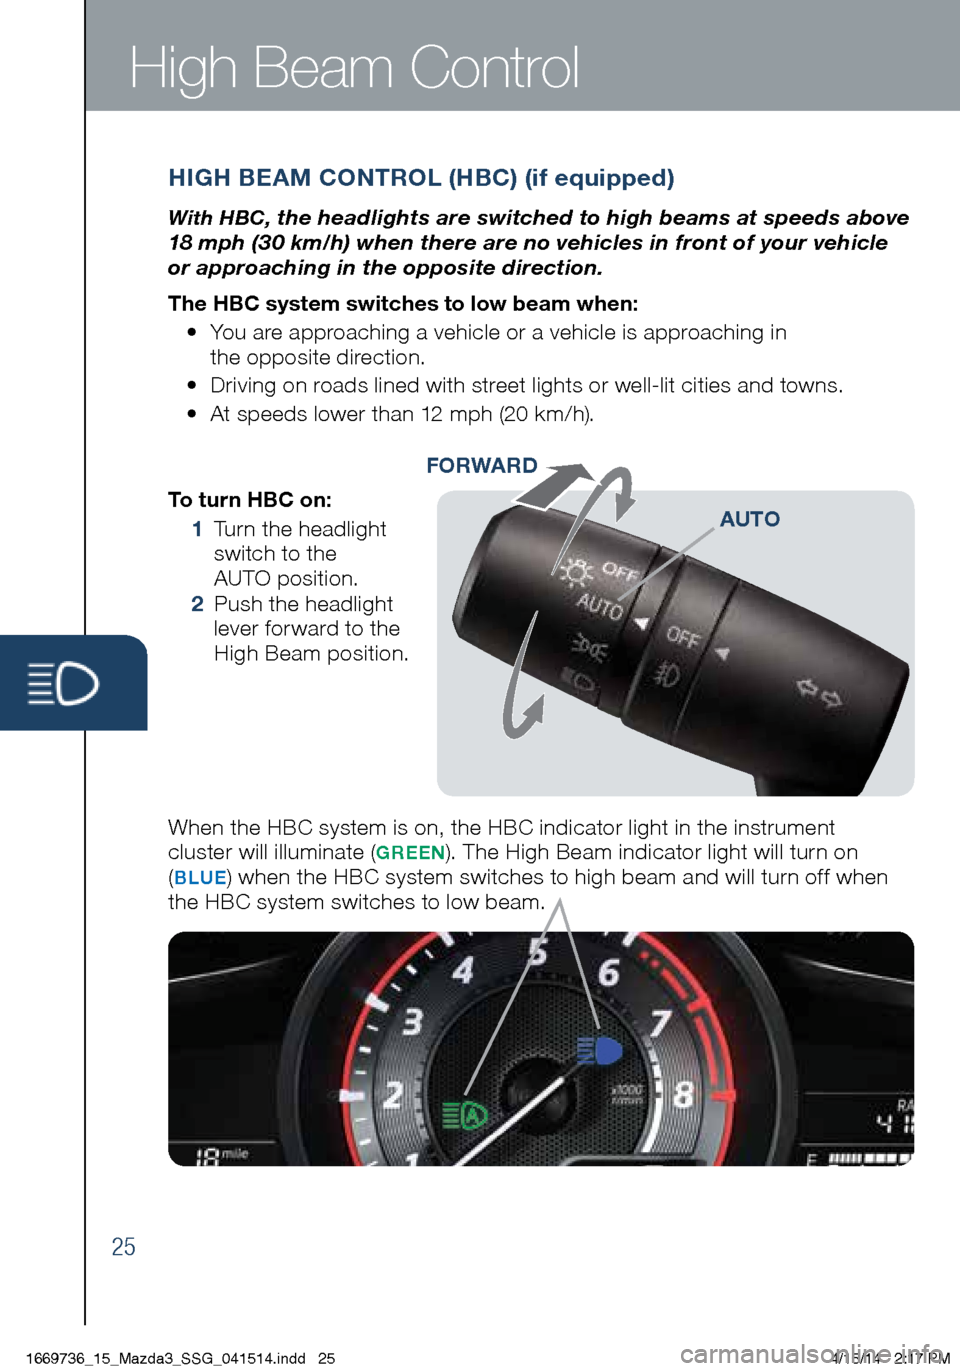 MAZDA MODEL 3 HATCHBACK 2014  Smart Start Guide (in English) 25
High Beam Control
To turn HBC on:
 1    Turn the headlight 
switch to the   
AUTO position.
 2   Push the headlight   
lever forward to the   
High Beam position.
When the HBC system is on, the HBC